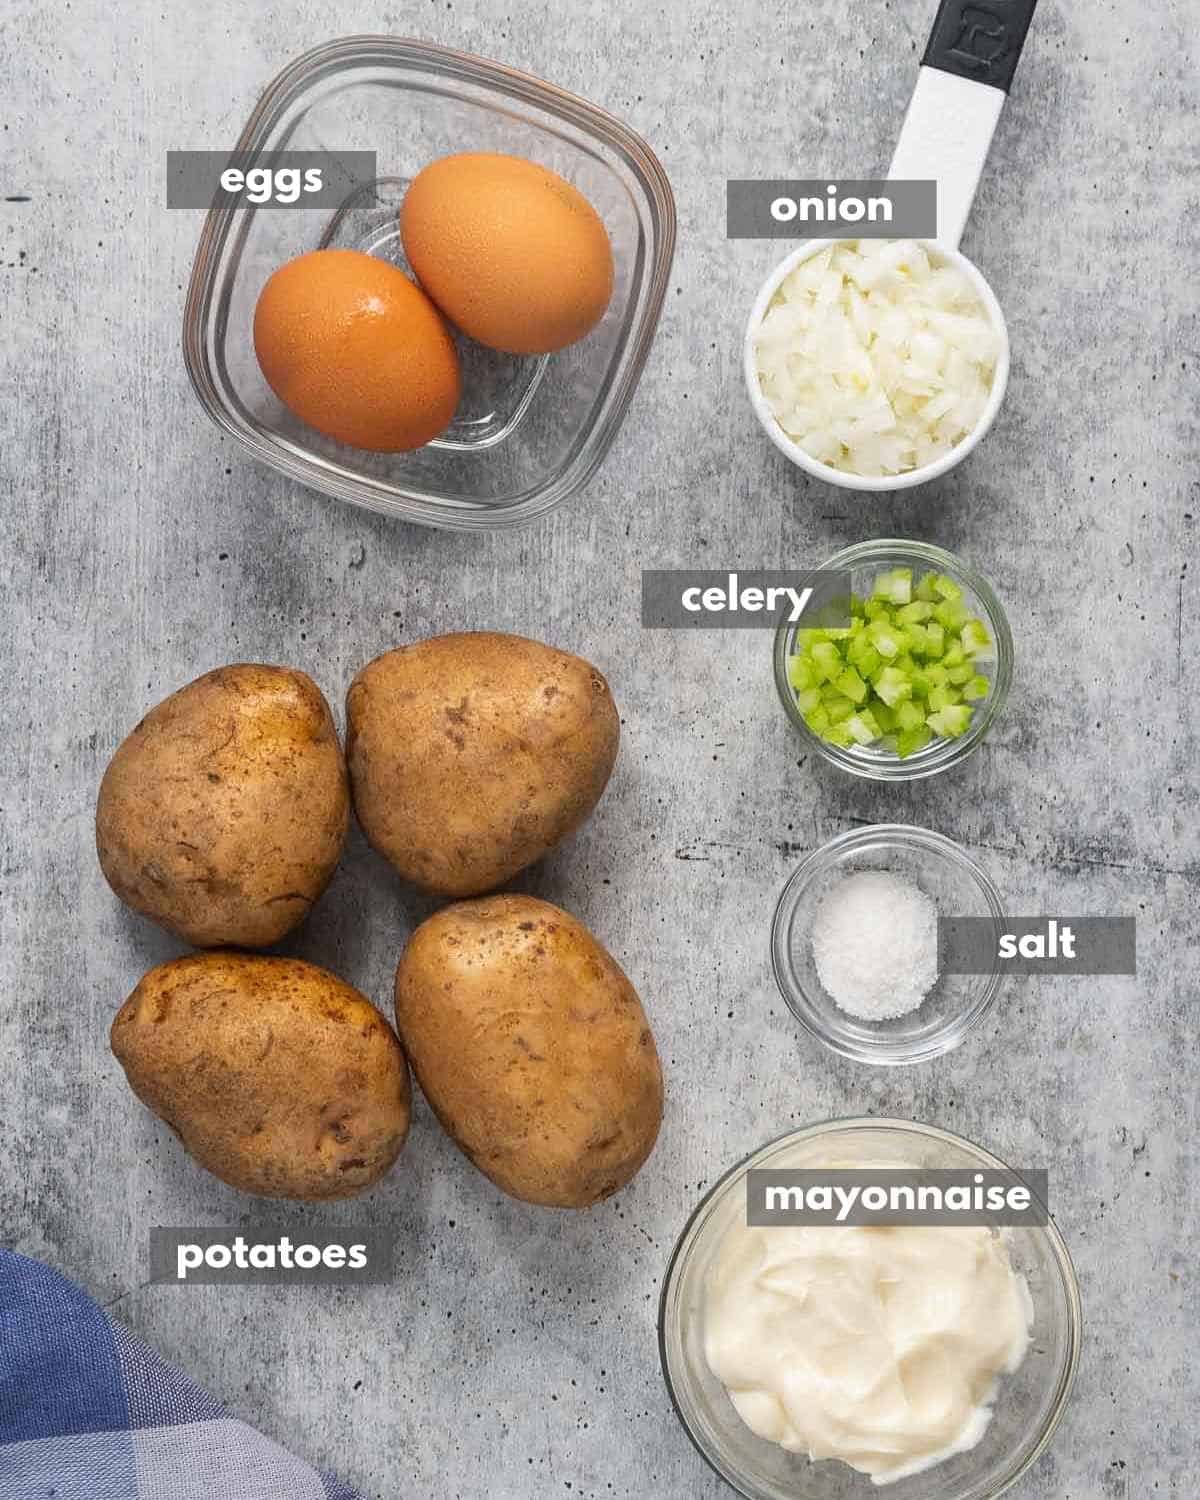 Top view of Ingredients to make potato salad (potatoes, mayonnaise, chopped celery, chopped onions, eggs, and salt).